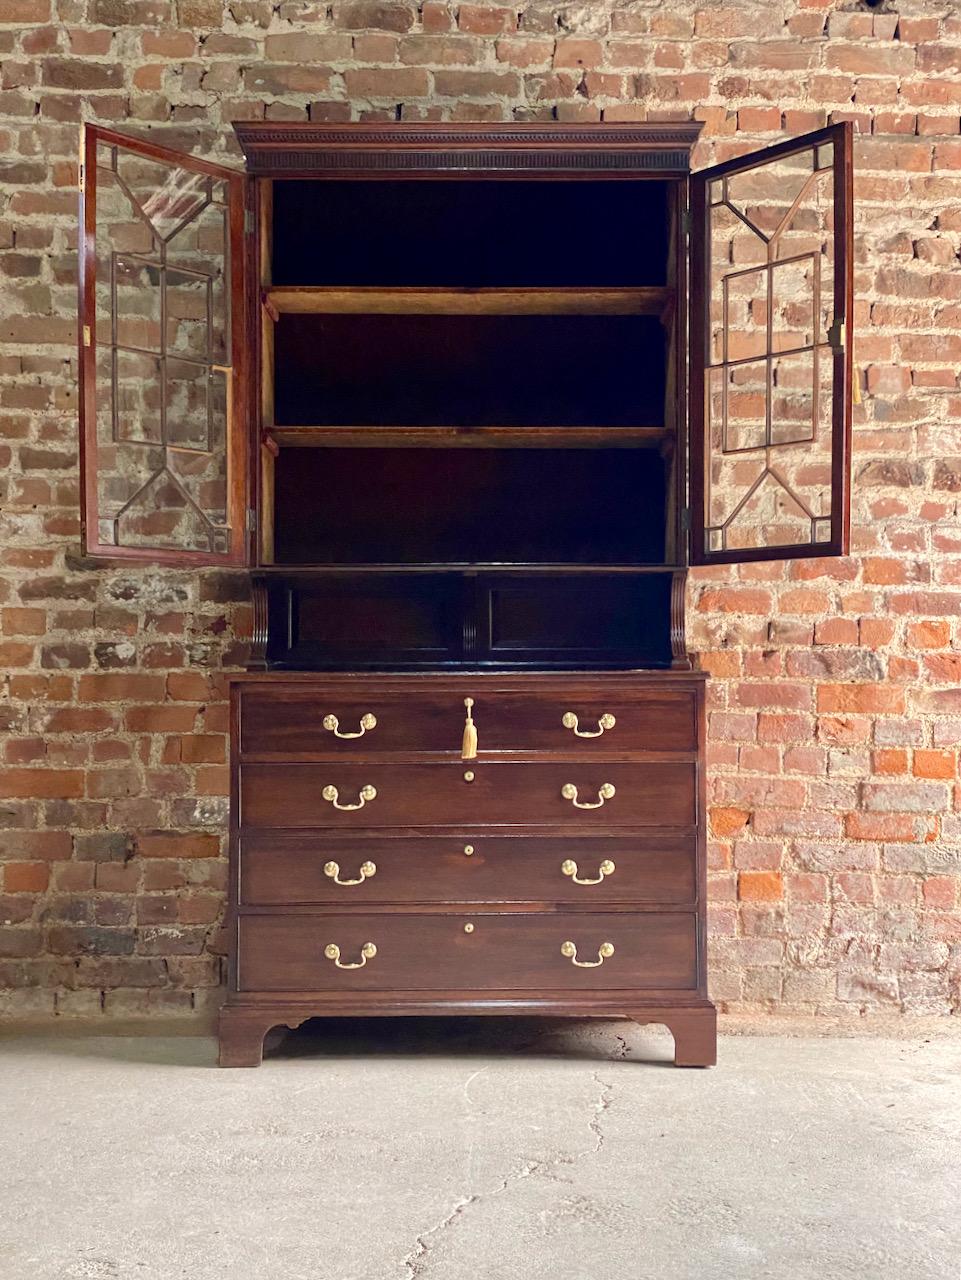 Magnificent 19th century Victorian mahogany astragal bookcase secretaire England circa 1875, the galleried upper section with corniced top with dentil moulding over two astragal glazed doors with elegant geometric design, brass detail to front of